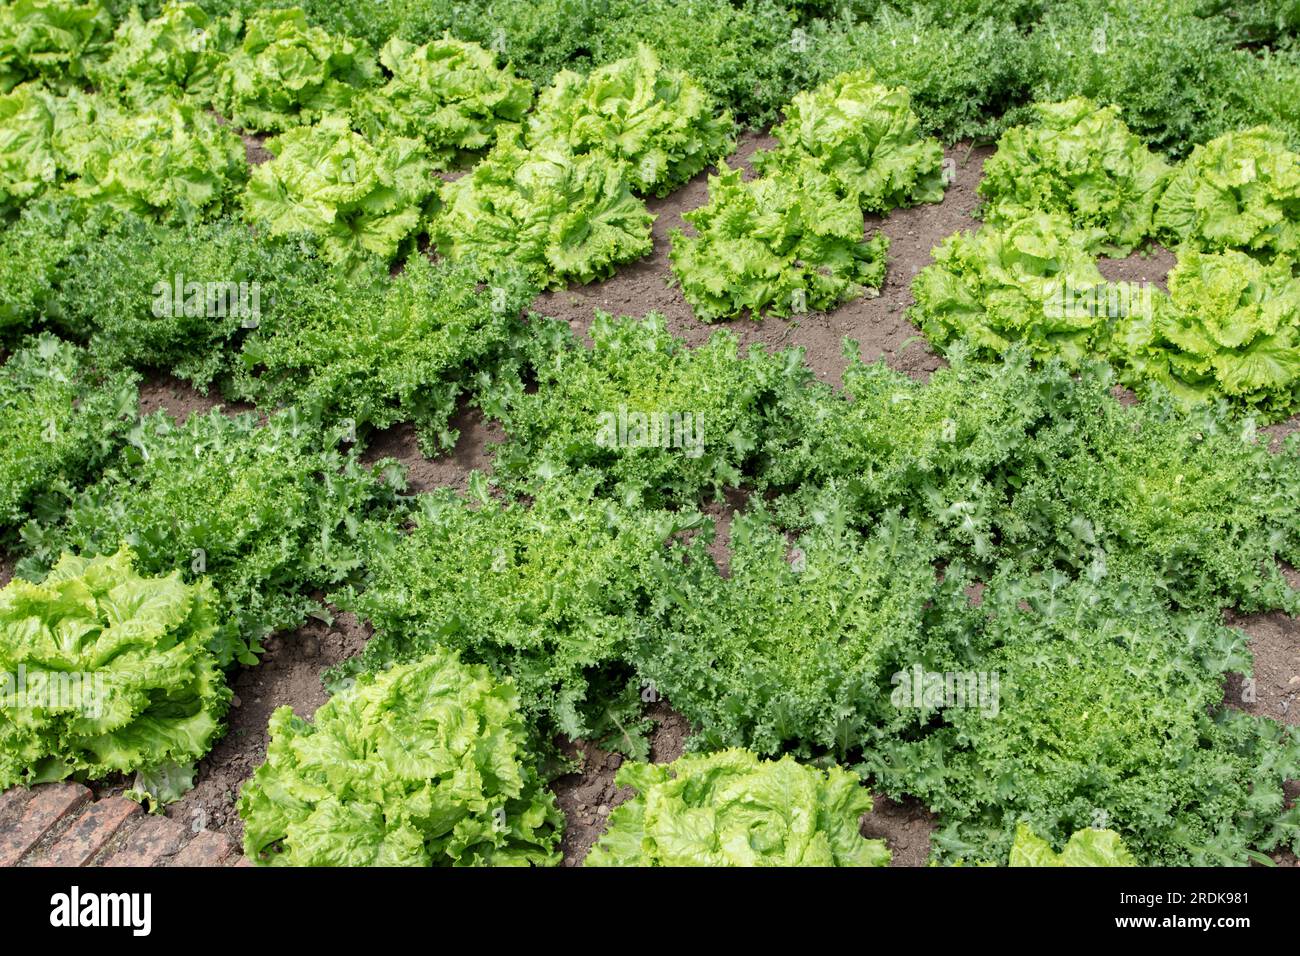 Endive and lettuce salad plants in the organic garden. Lactuca sativa and Chicorium endivia at the vegetable bed.Companion planting. Stock Photo